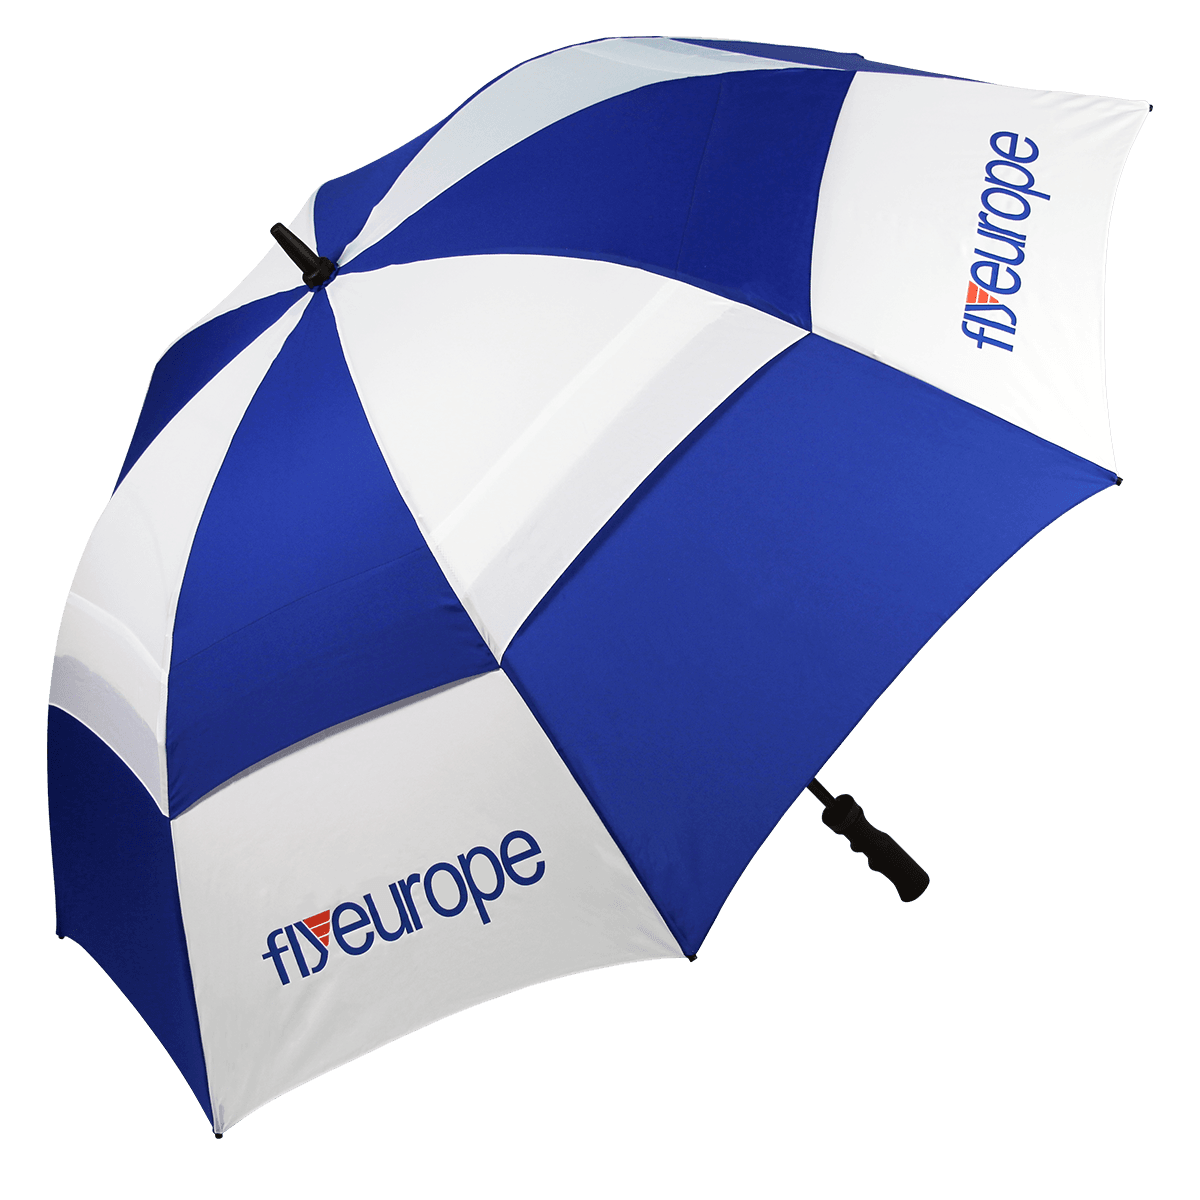 Sheffield Sports Vented Umbrella - The Luxury Promotional Gifts Company Limited